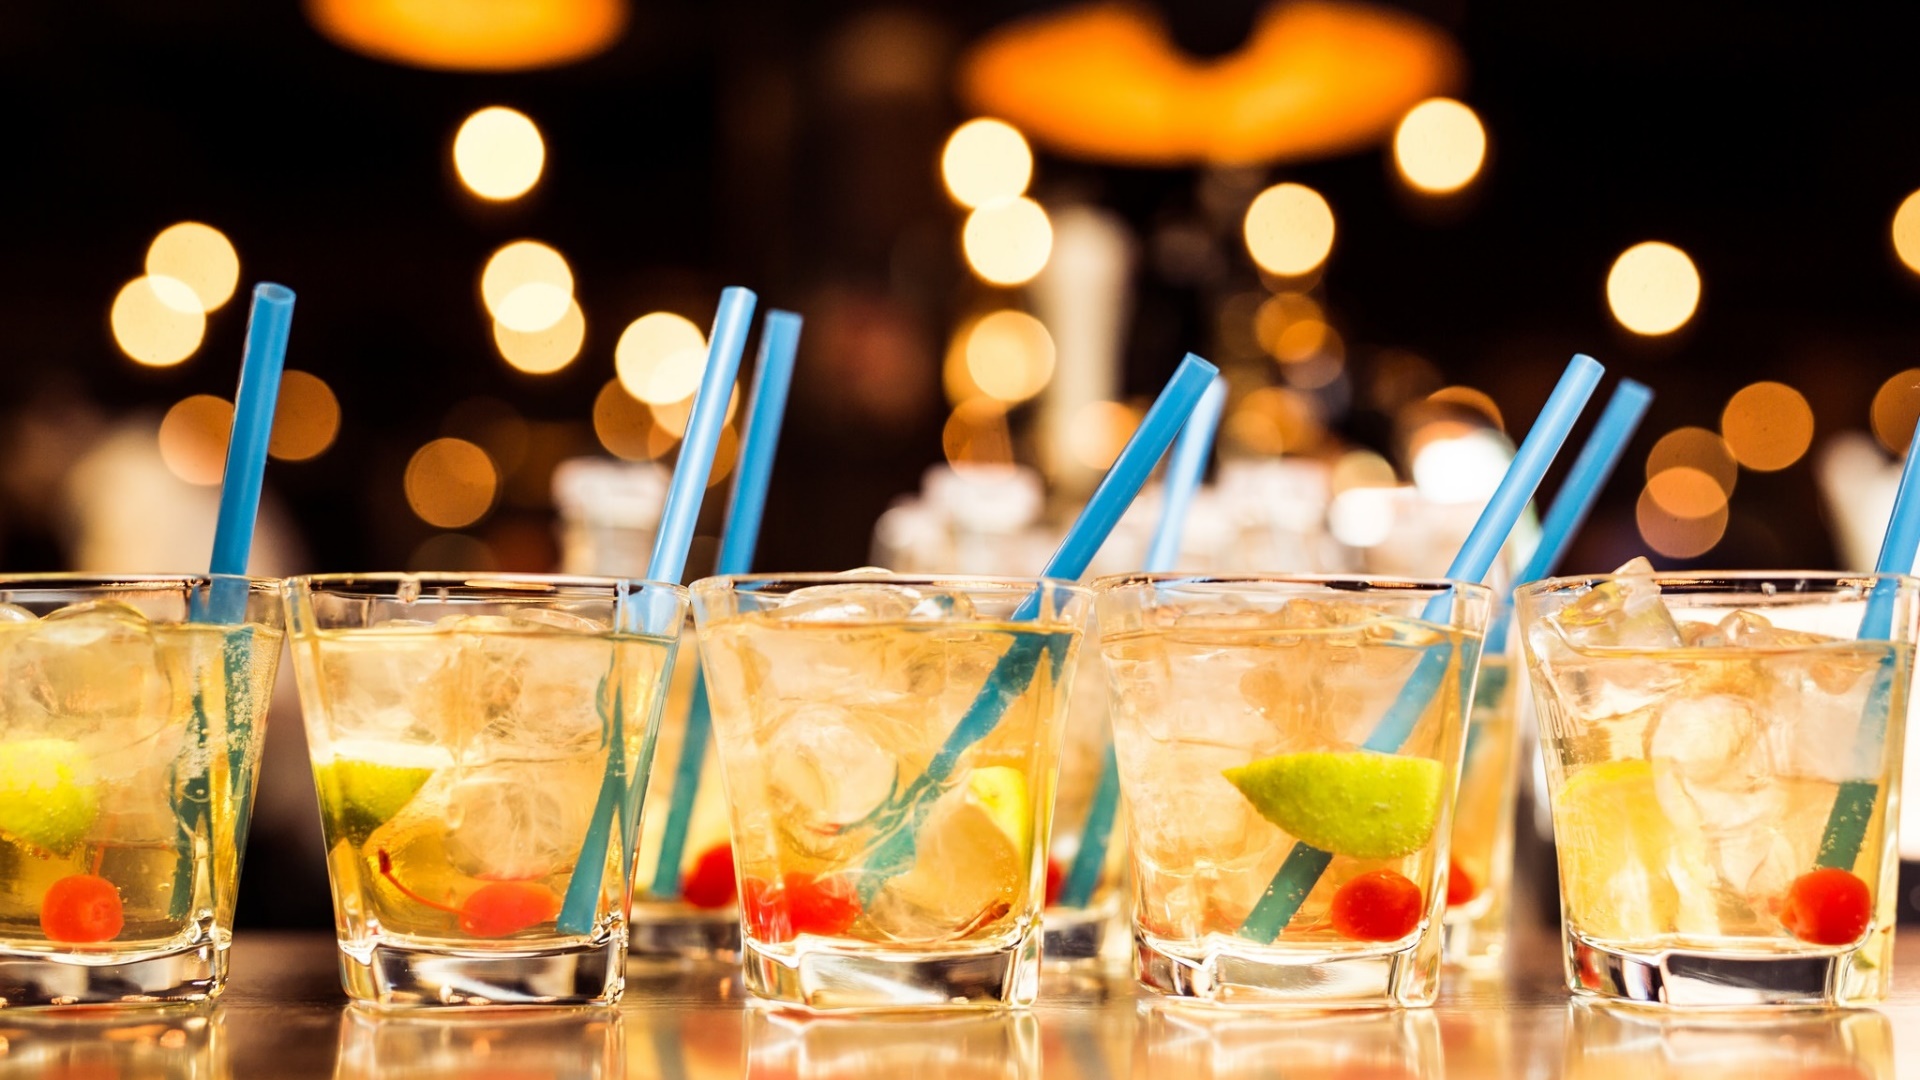 Cocktails Drinking Glass Blurred Lights 1920x1080